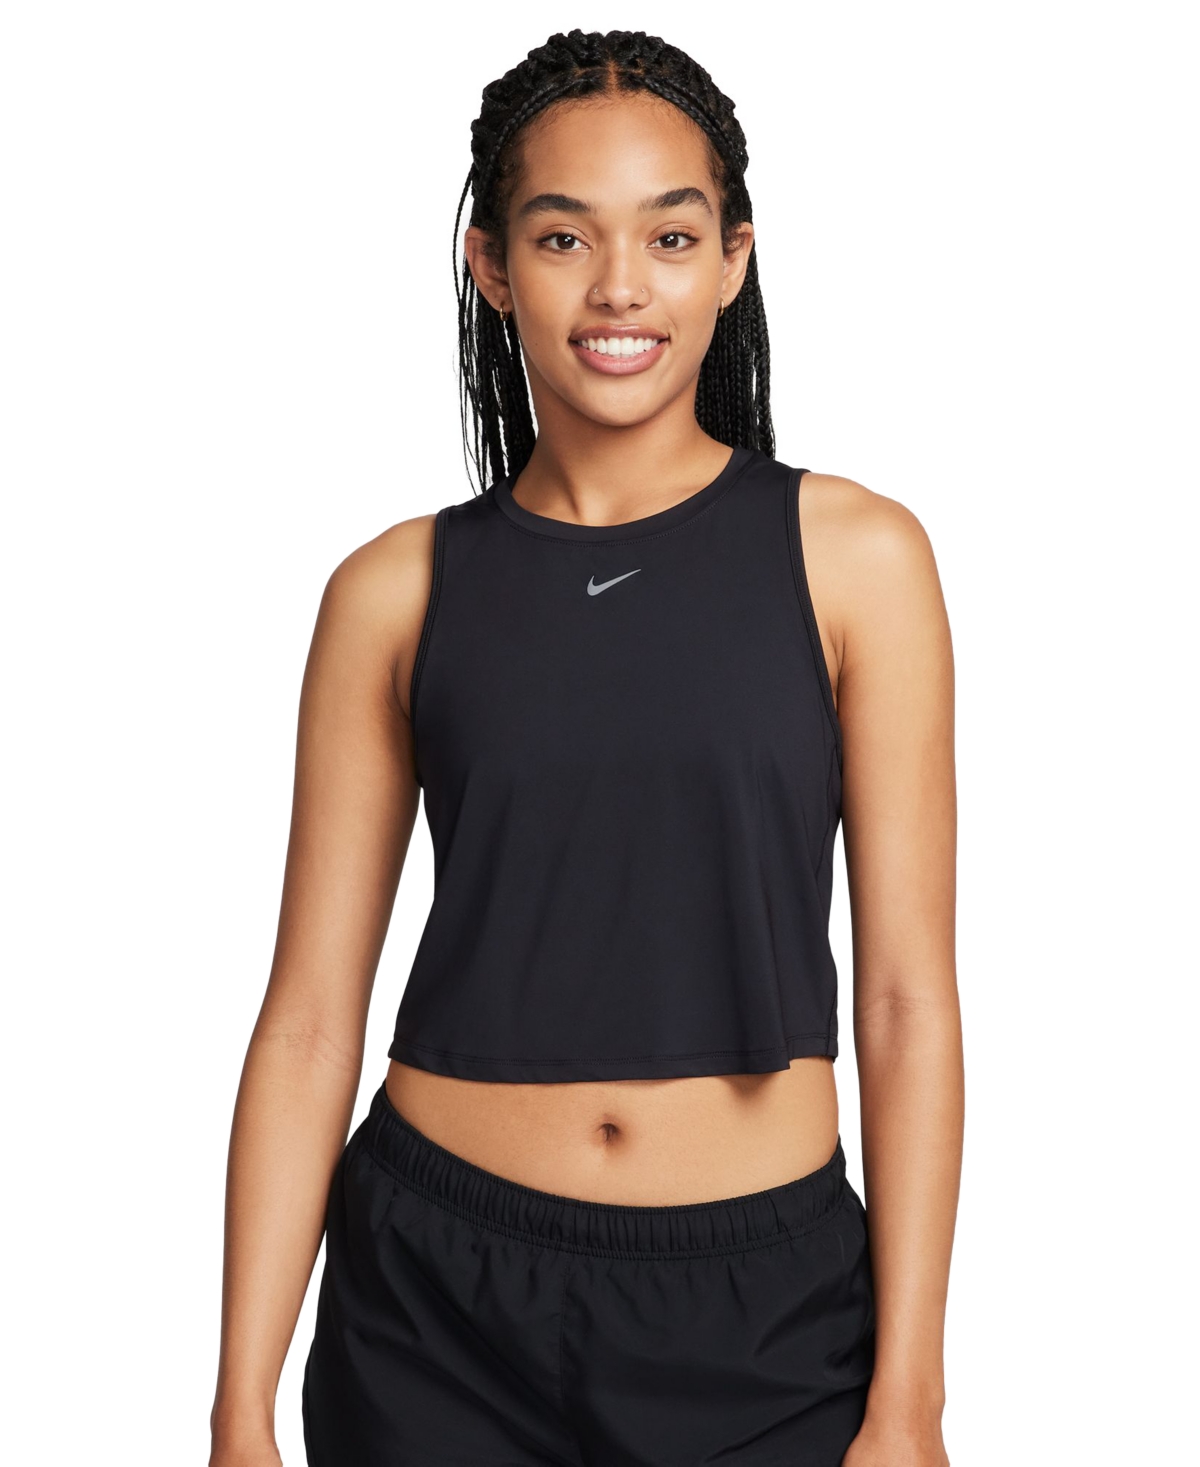 Women's Solid One Classic Dri-fit Cropped Tank Top - Lt Armory Blue/black